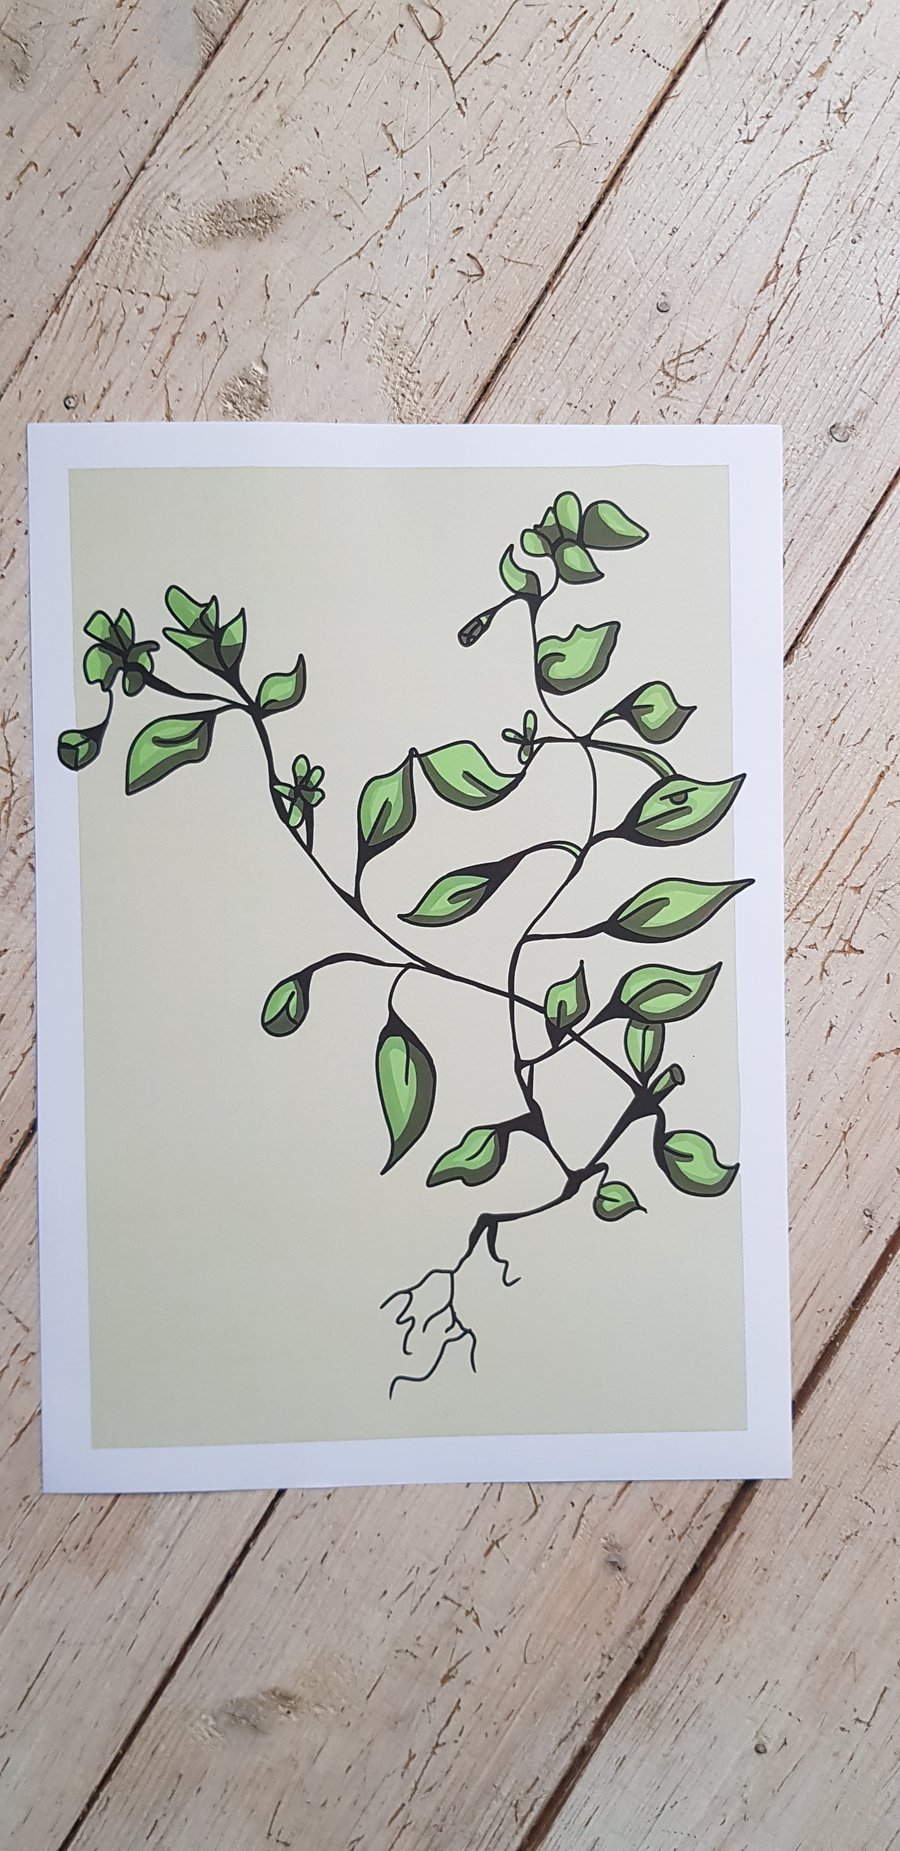 Chickweed - A4 print with border